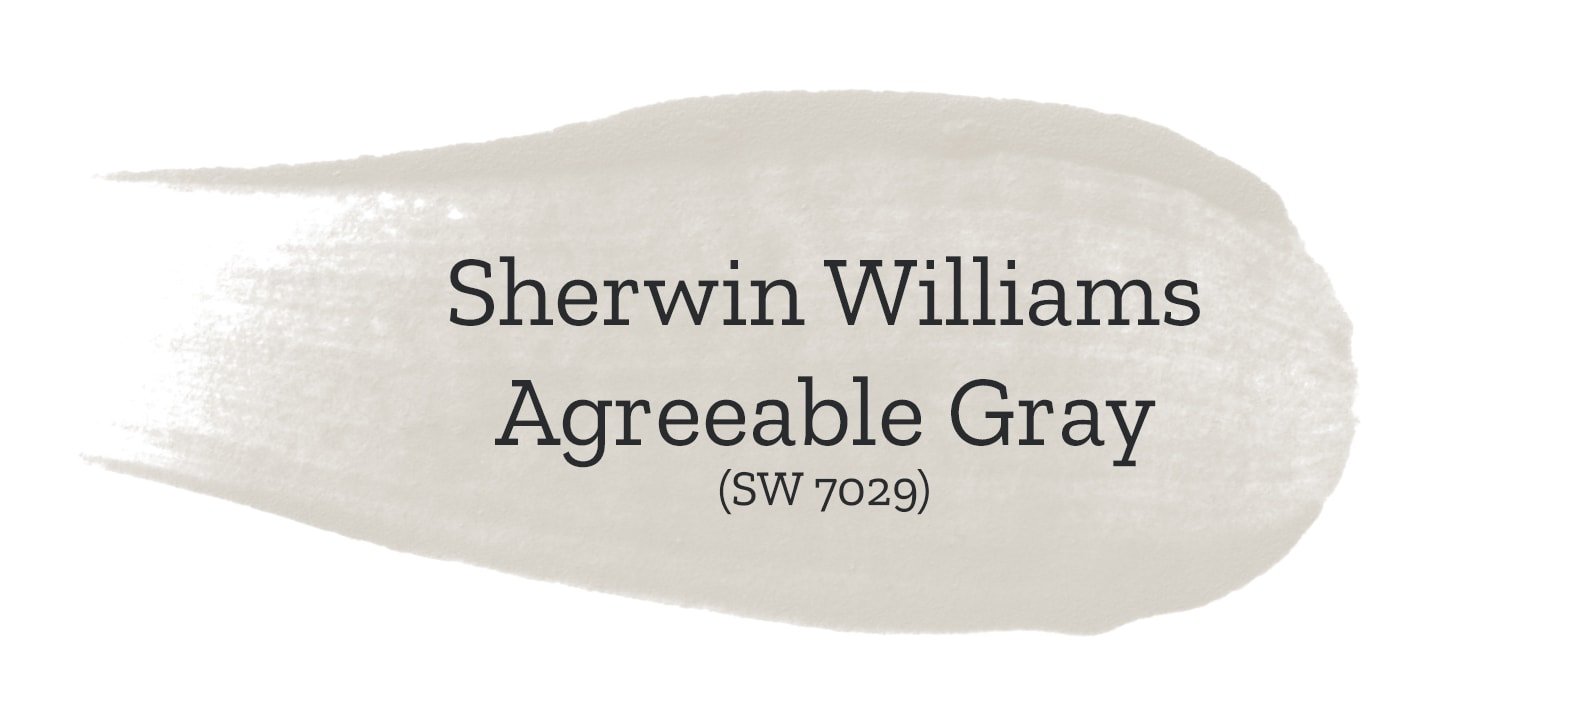 SW Agreeable Gray 7029